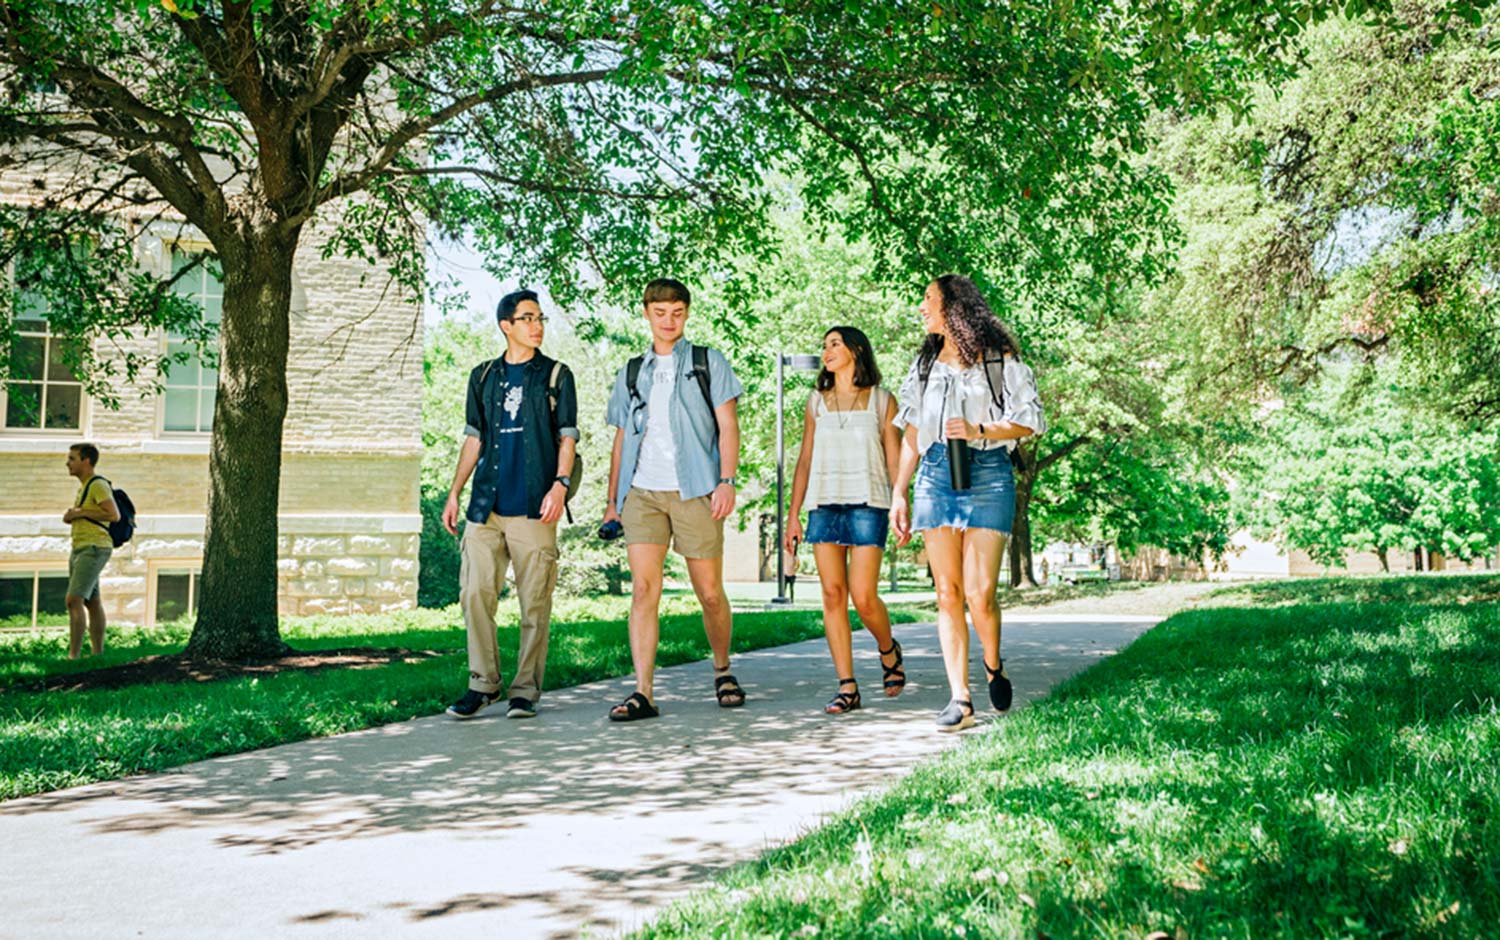 Students chat and walk through campus